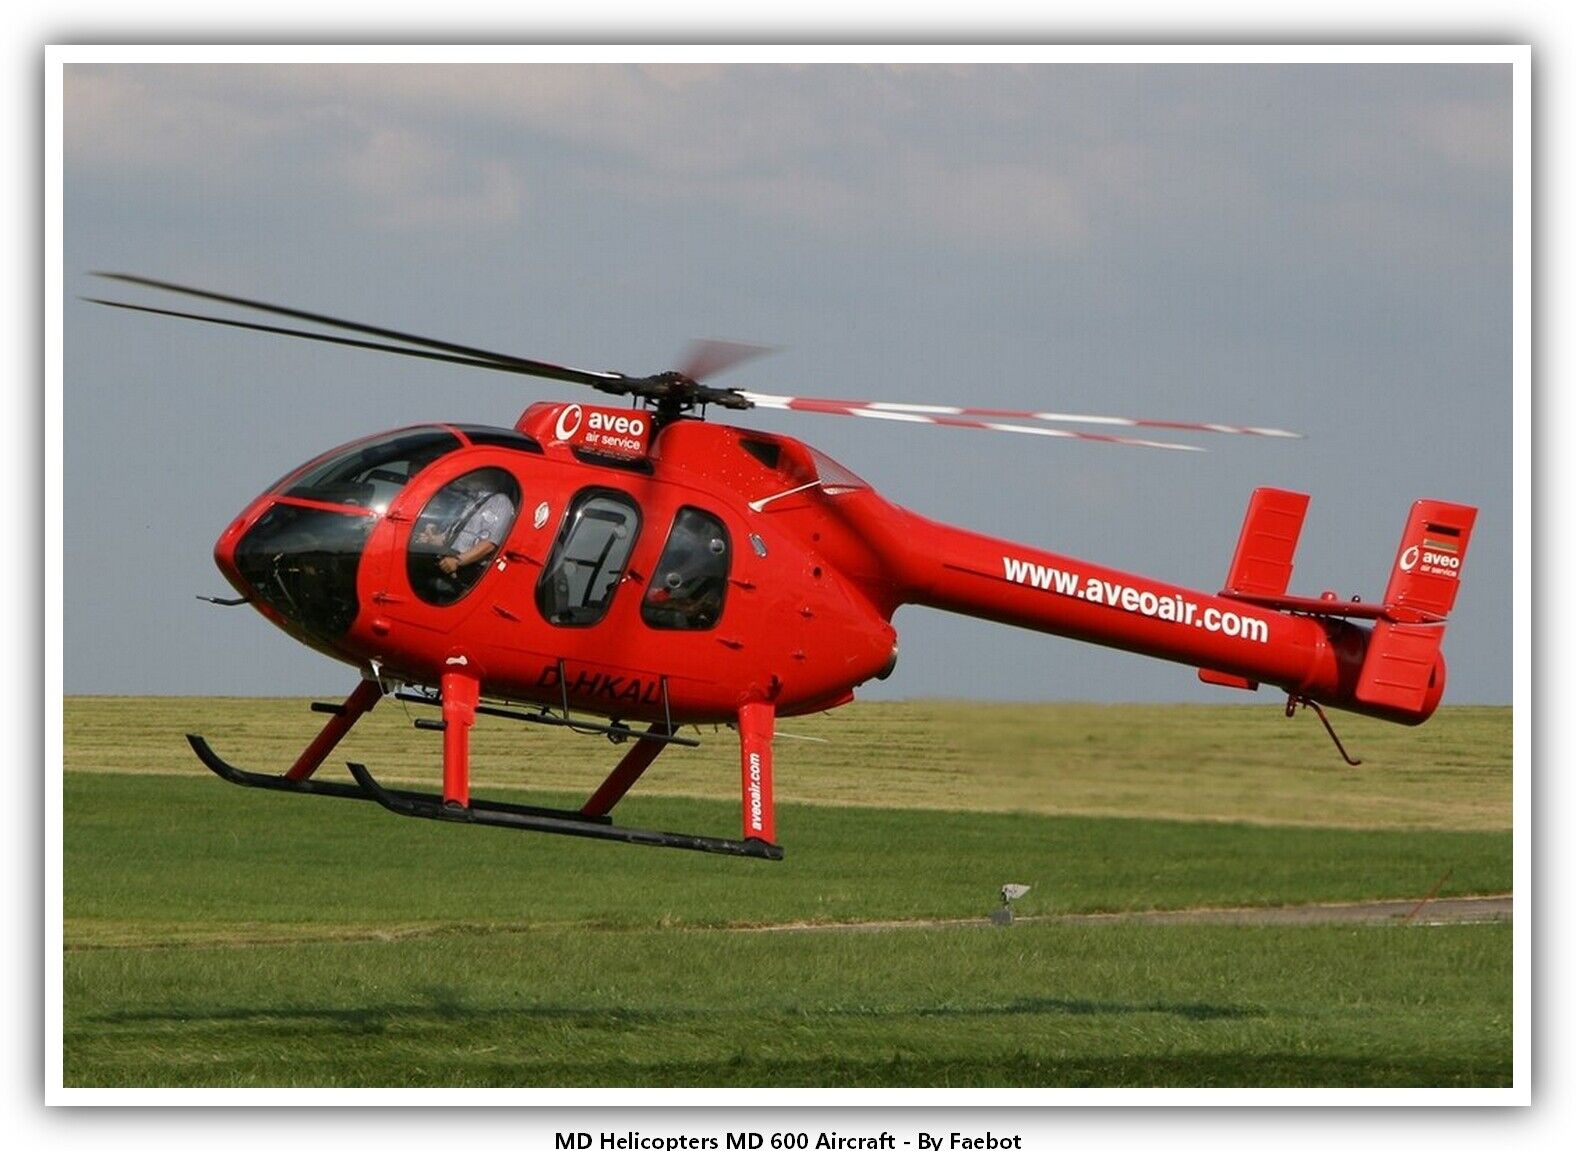 MD Helicopters MD 600 Aircraft